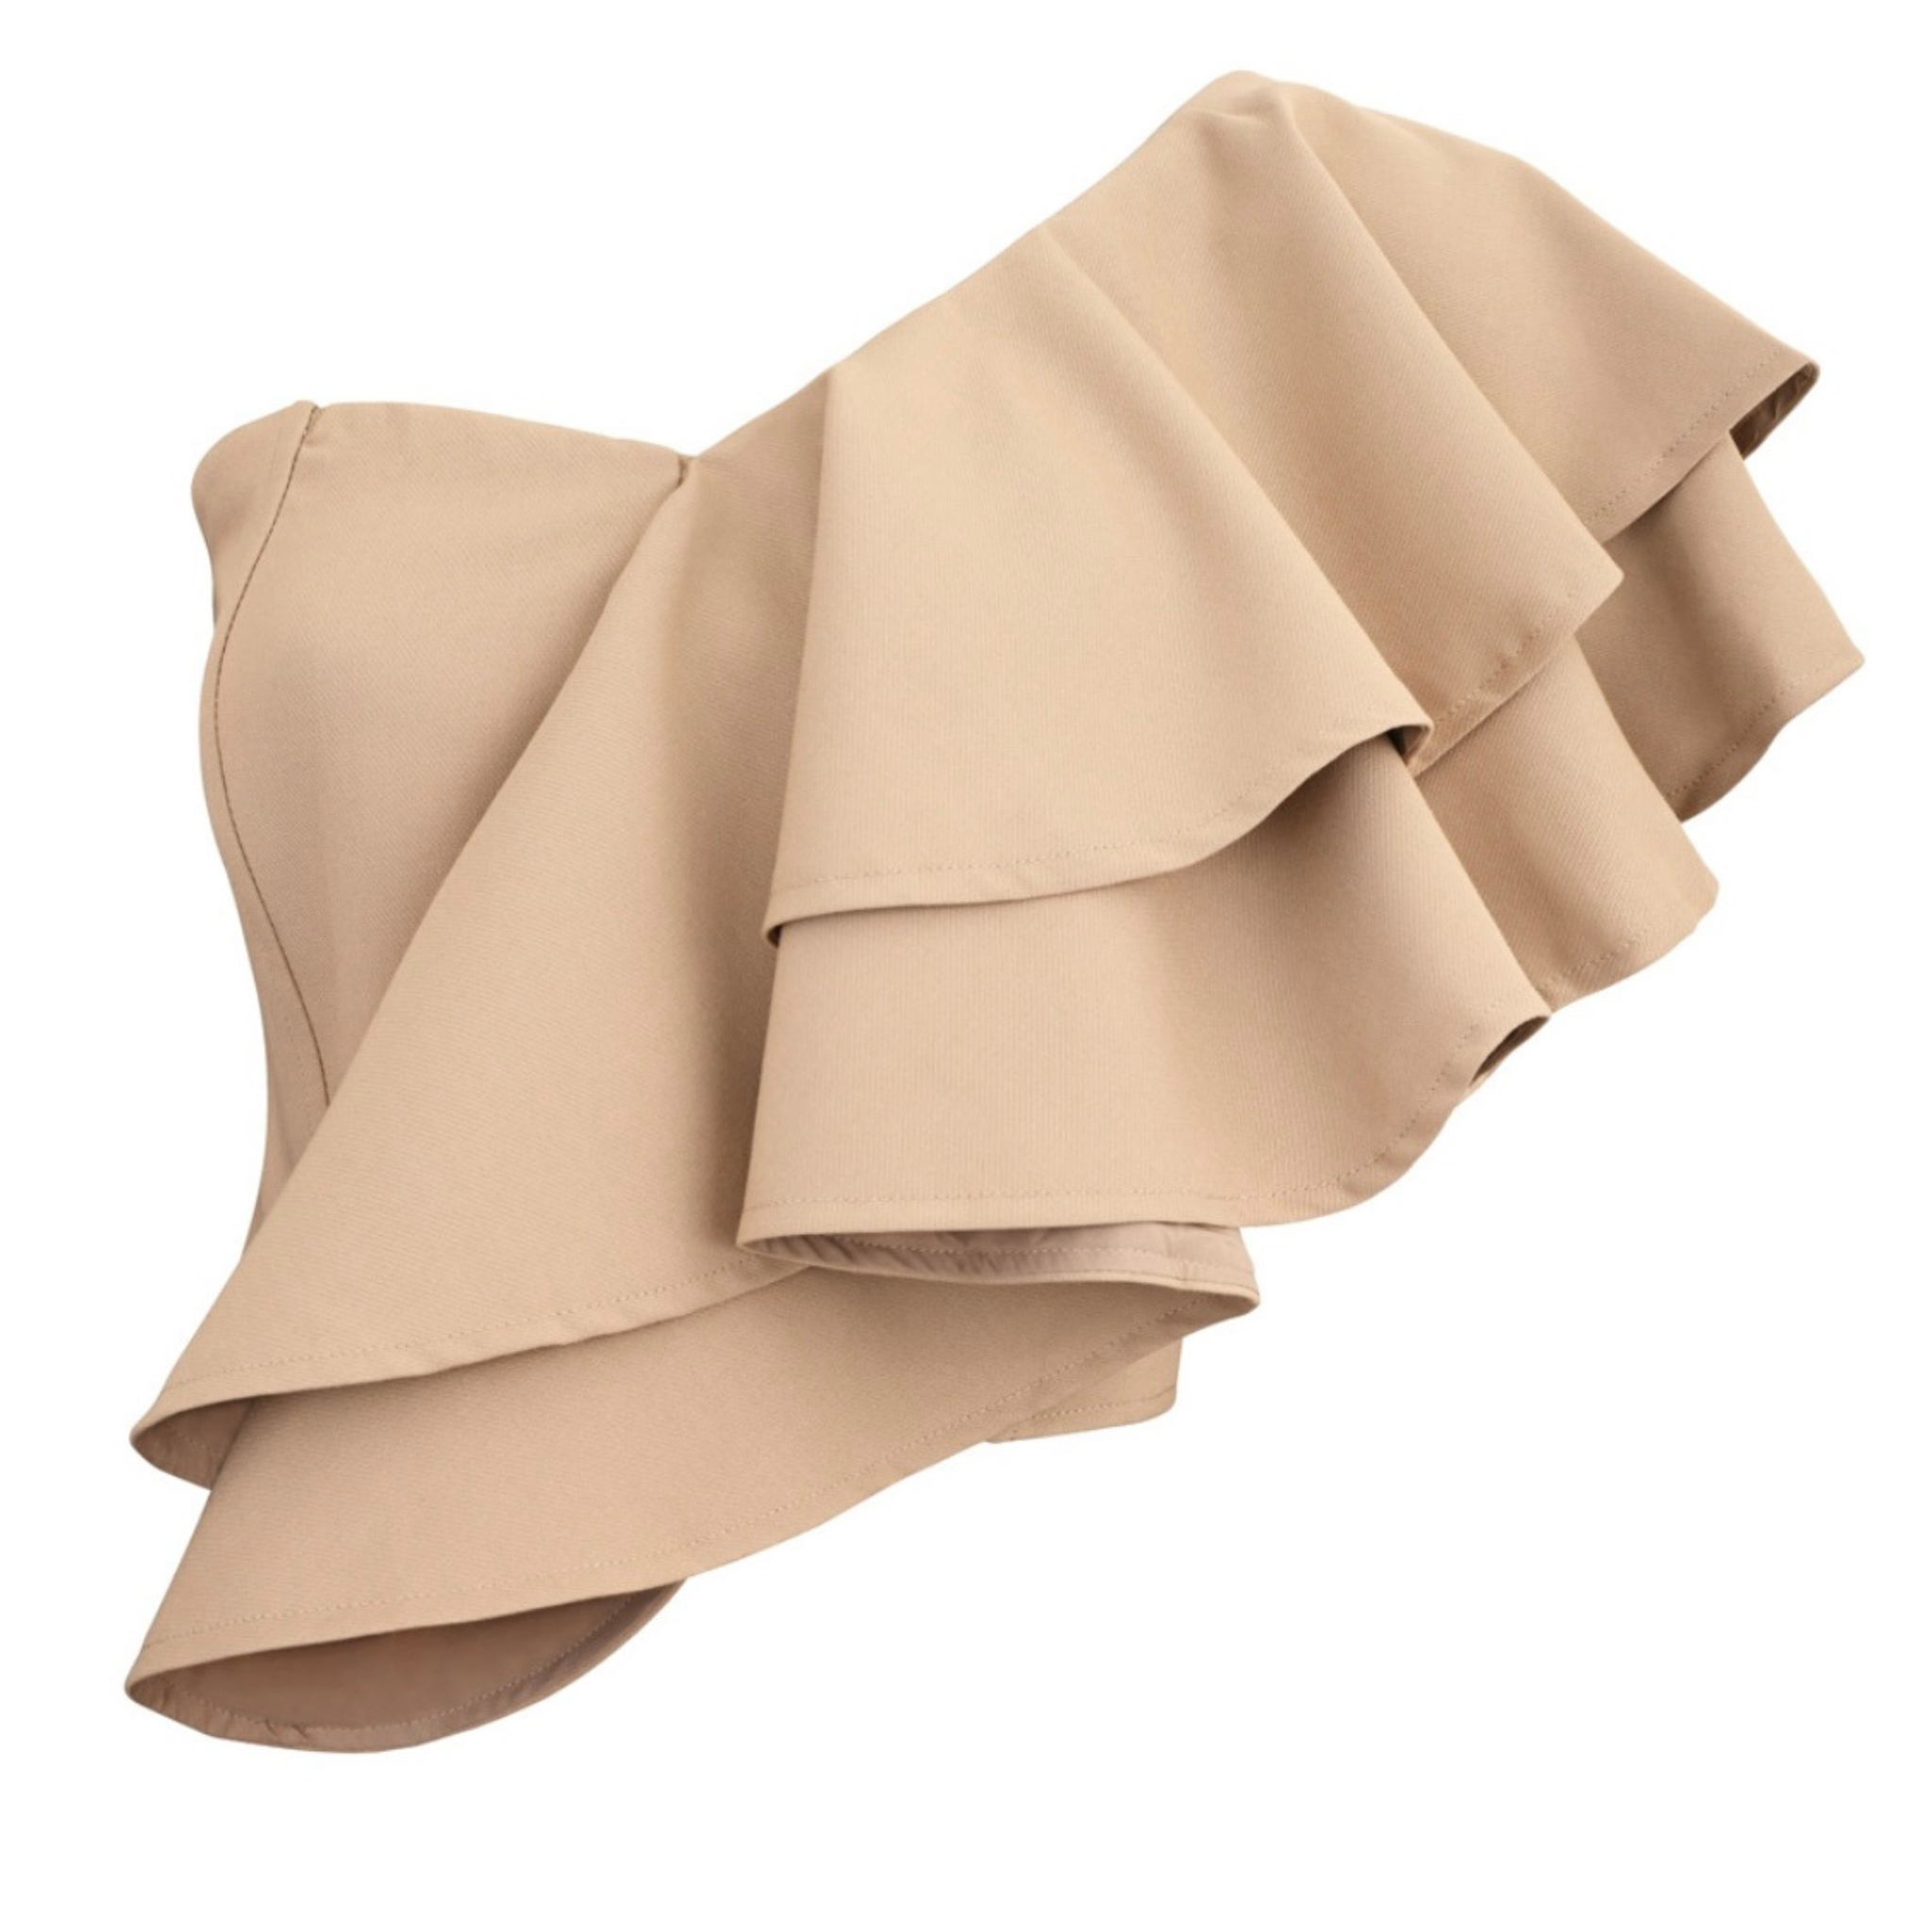 Beige one-shoulder ruffle crop top with boning for support. This chic crop top features a single shoulder design, delicate ruffle detailing, and boning for added support and structure. The versatile beige color adds a touch of sophistication, making it a trendy and stylish choice for any occasion.